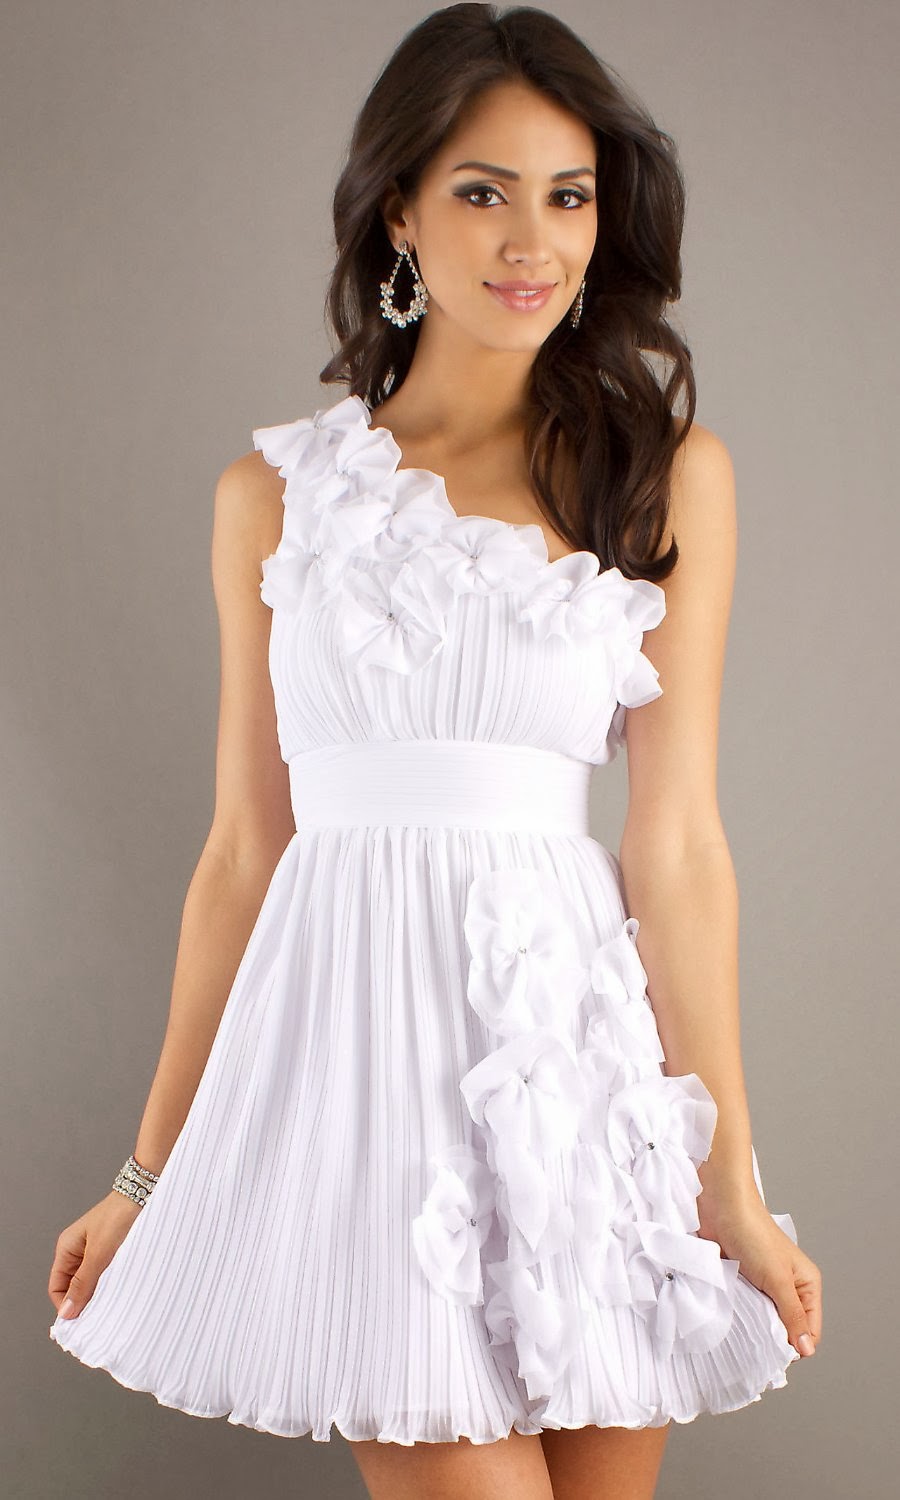 White Dress Pictures February 2014